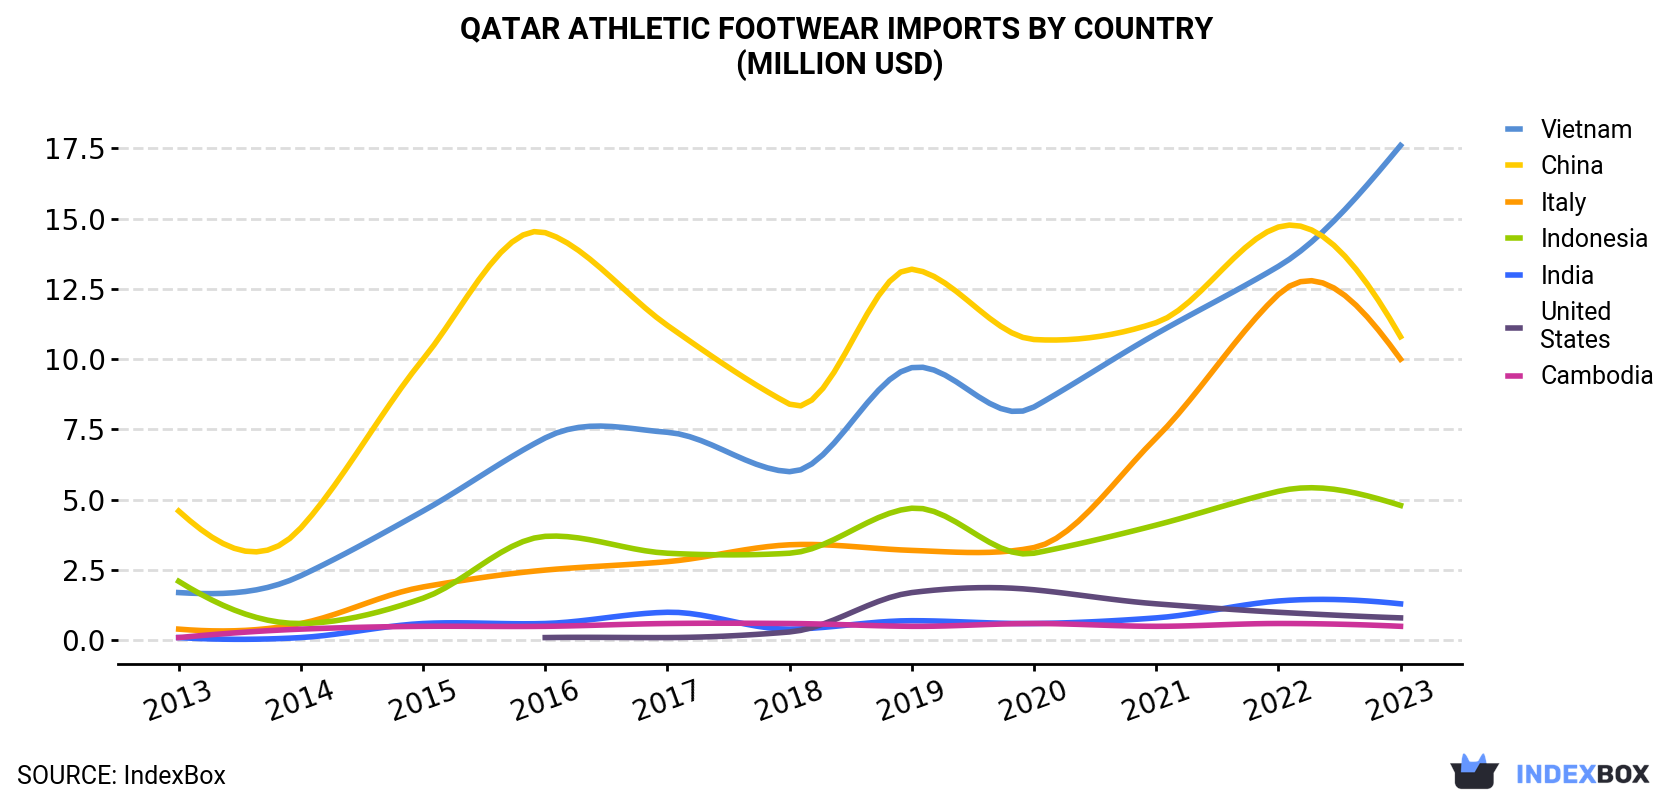 Qatar Athletic Footwear Imports By Country (Million USD)